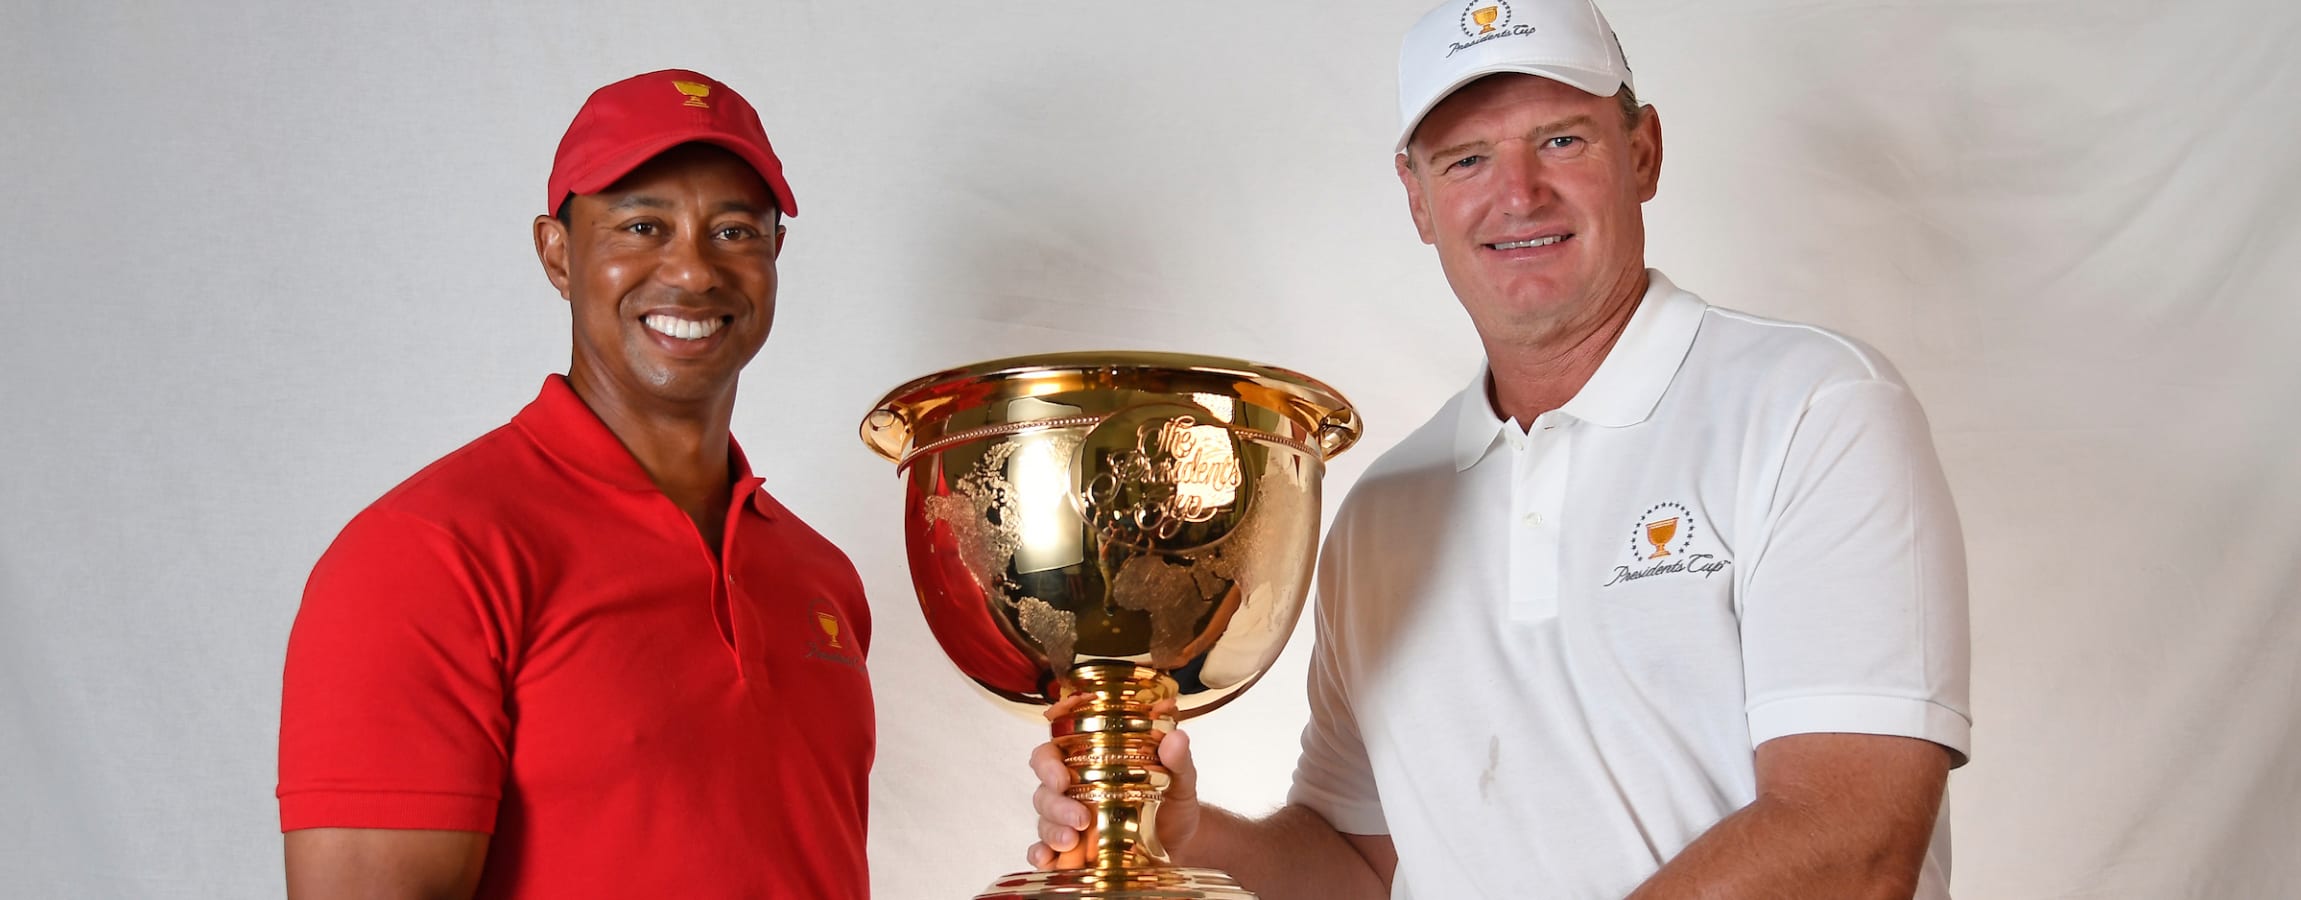 Presidents Cup Captains Tiger Woods and Ernie Els